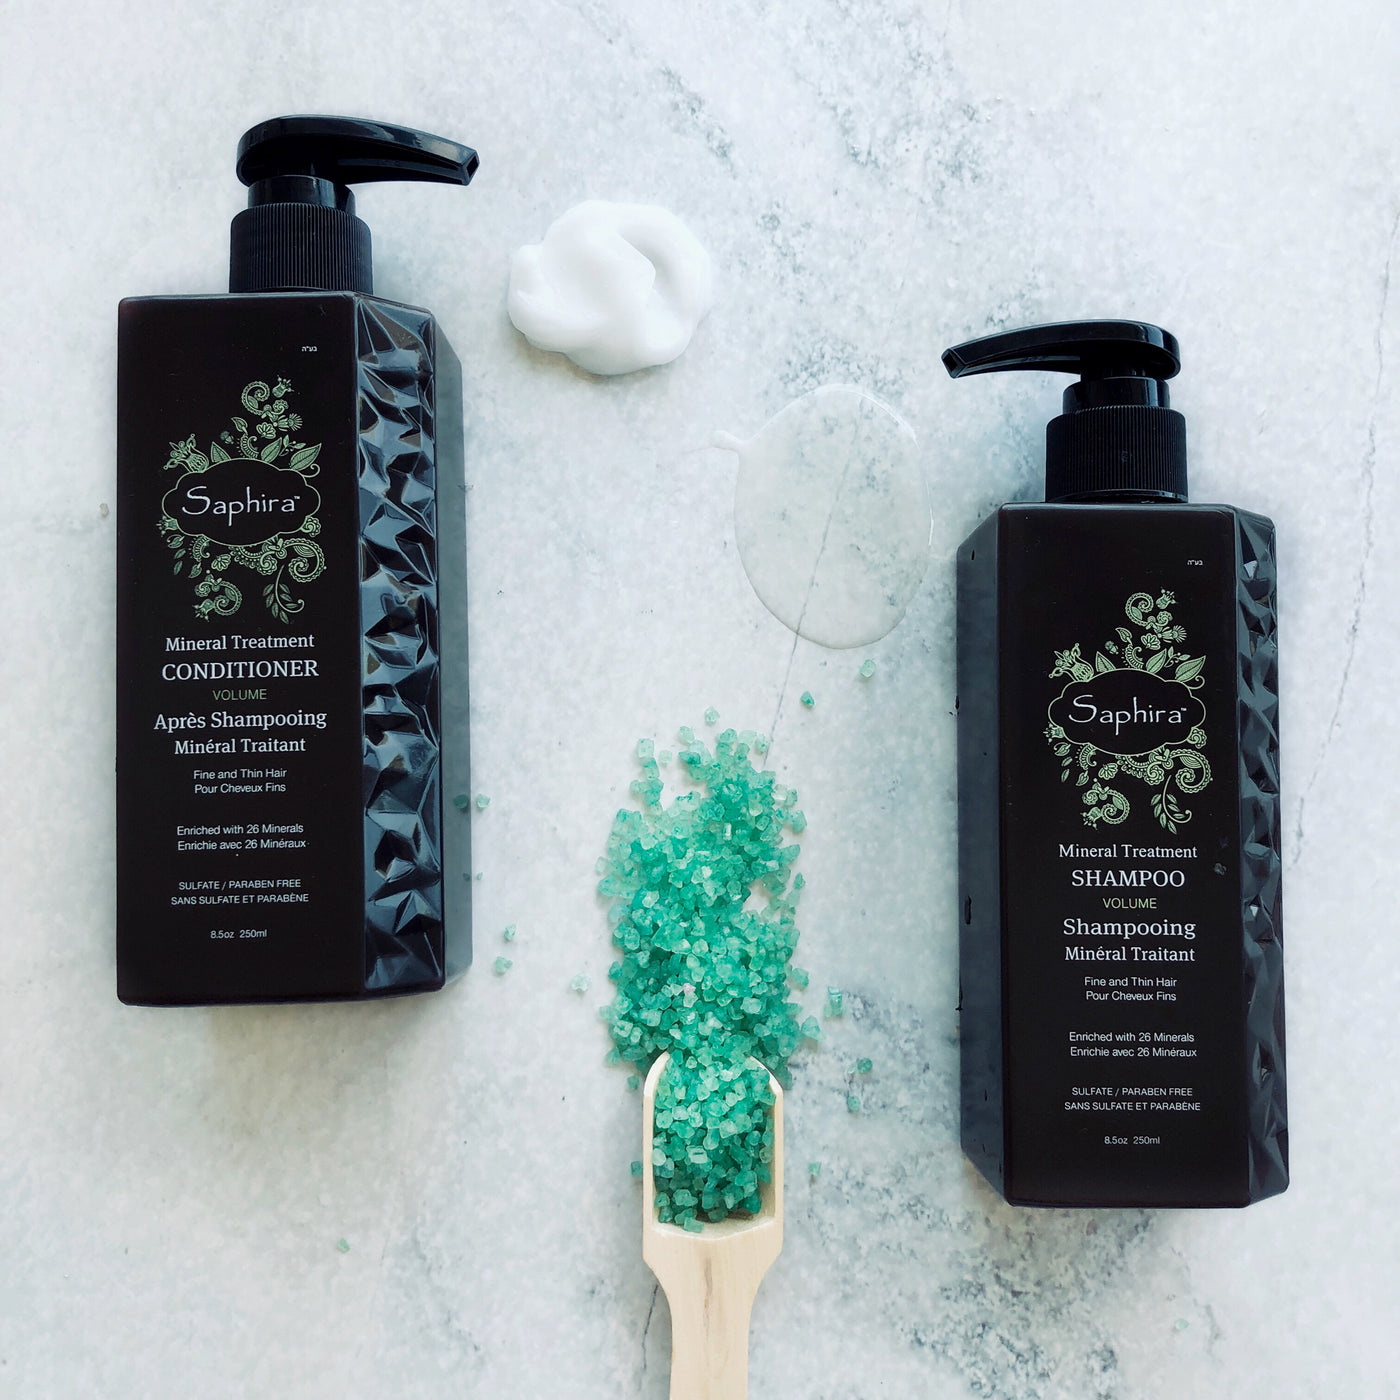 Cleansing and conditioning formulas that provide volume and texture